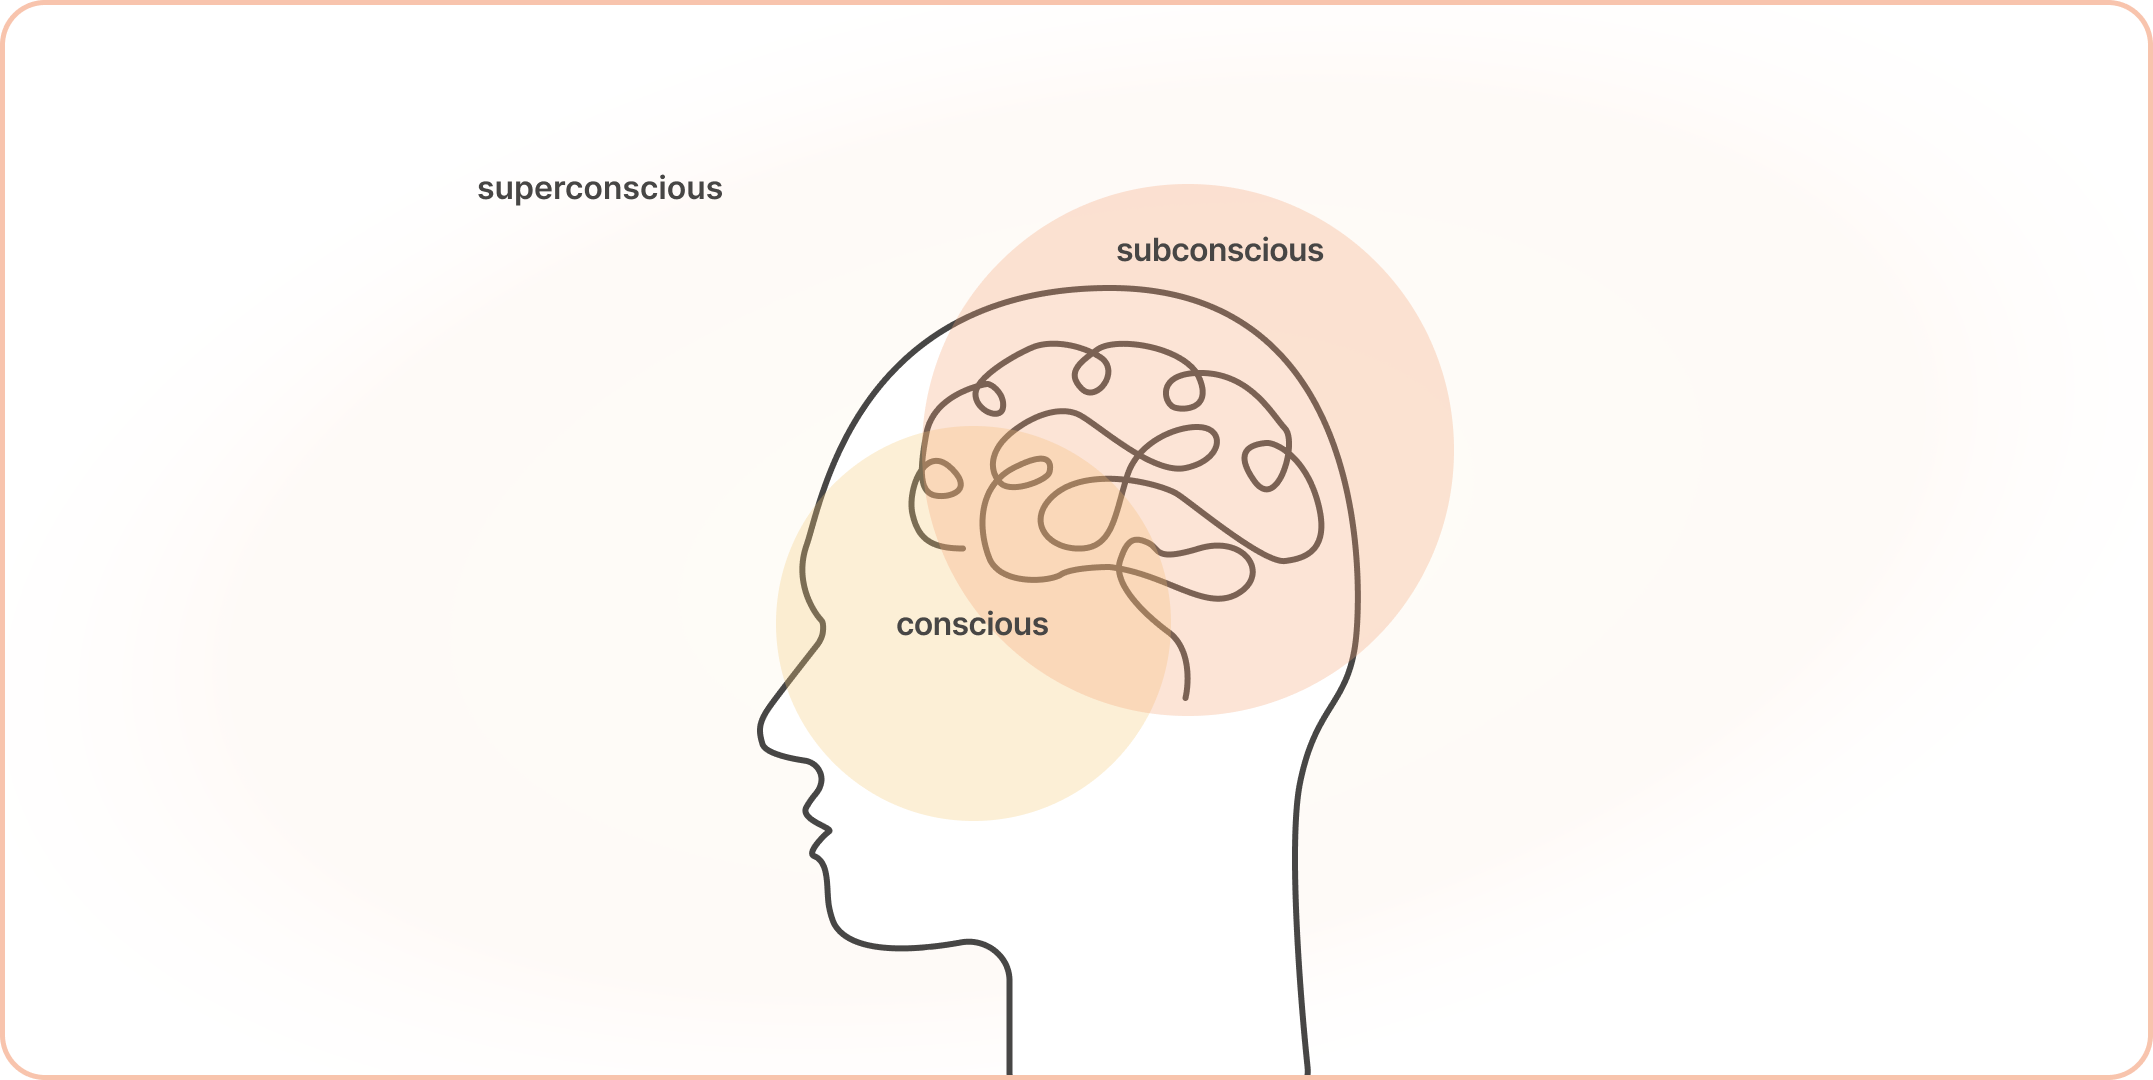 Illustration of the superconscious mind